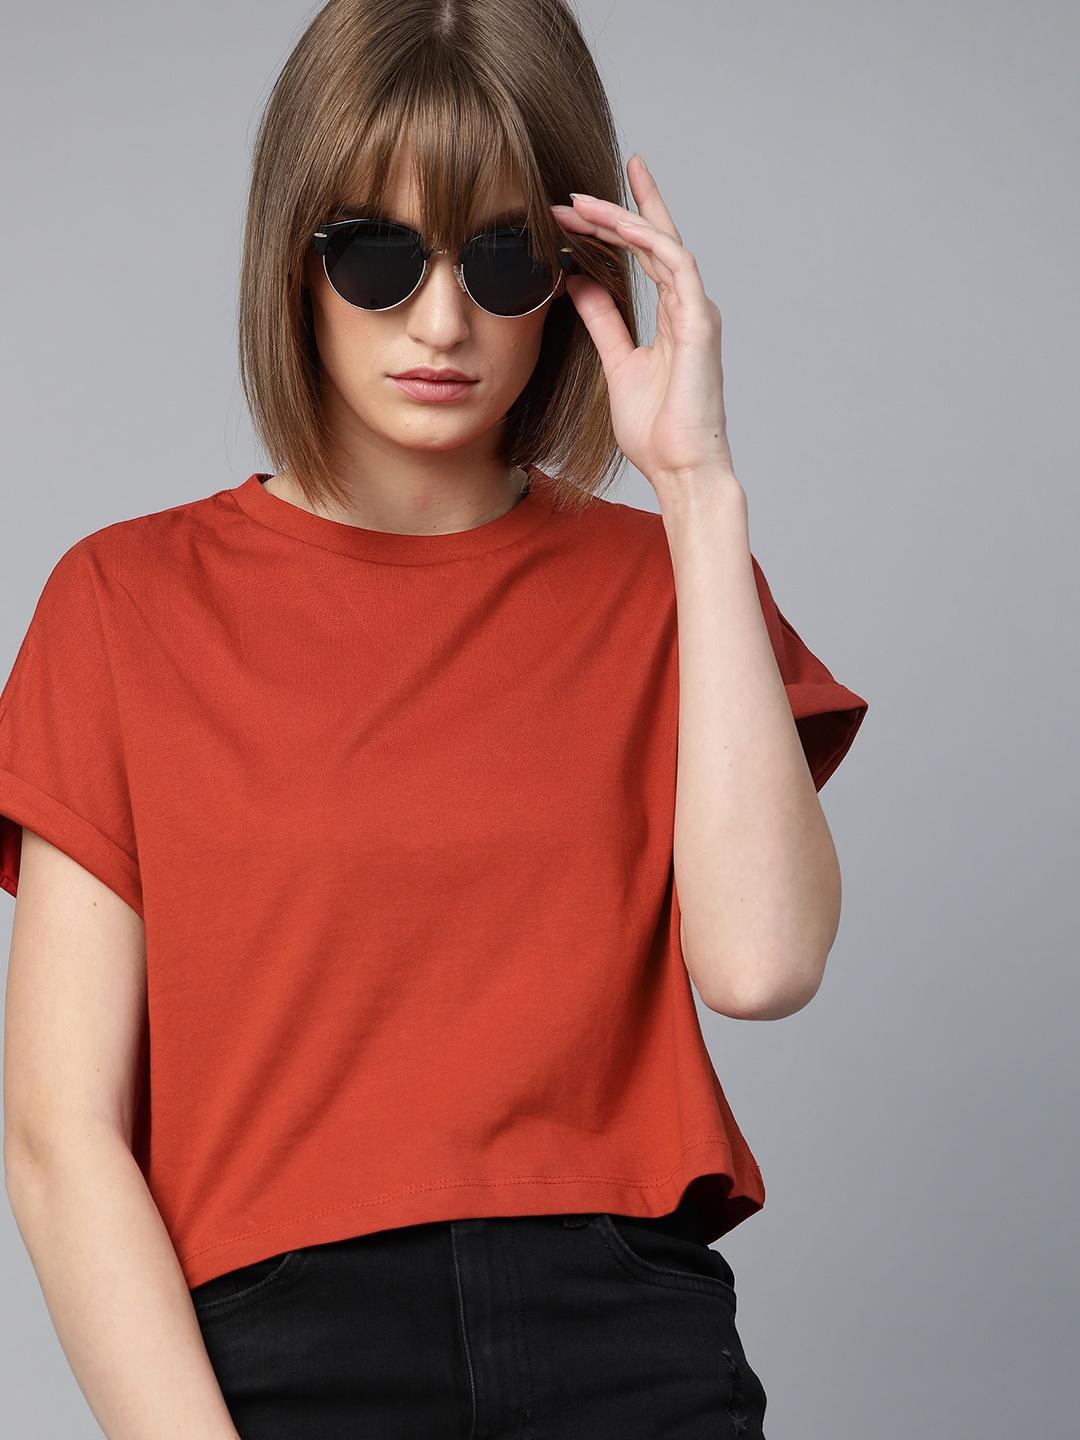 roadster-rust-red-round-neck-boxy-crop-top